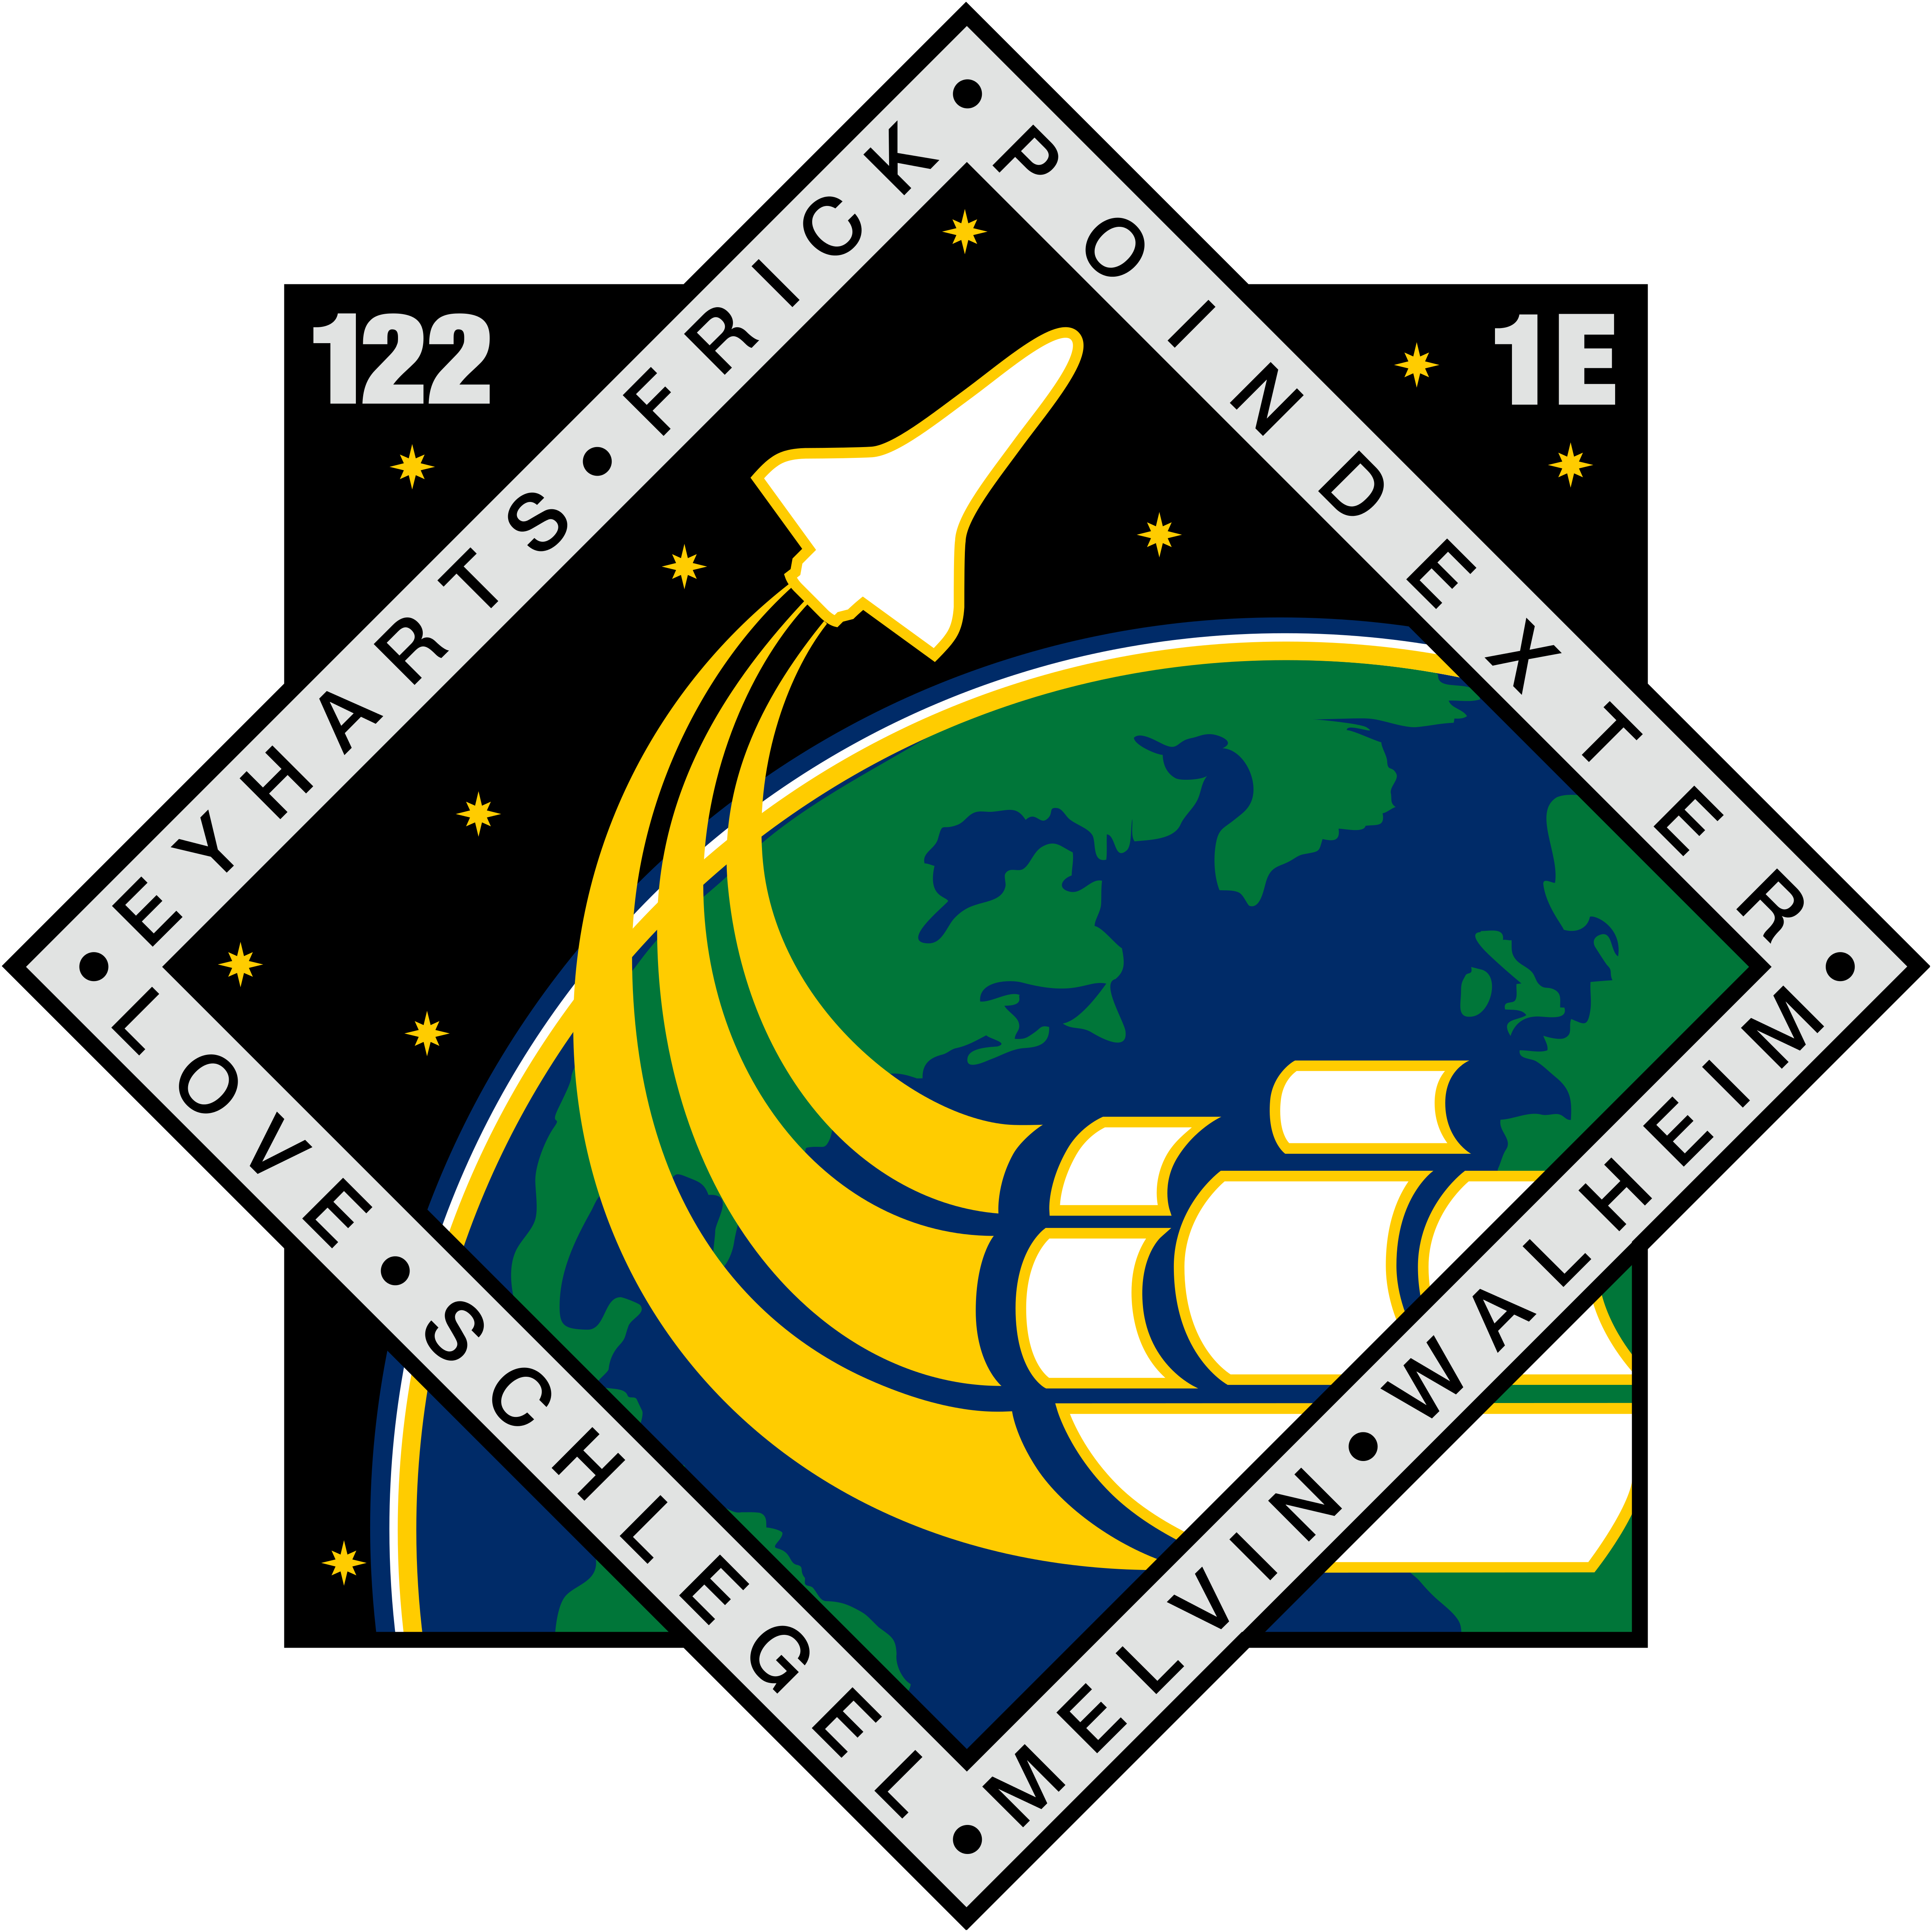 http://upload.wikimedia.org/wikipedia/commons/6/6f/STS-122_patch.png